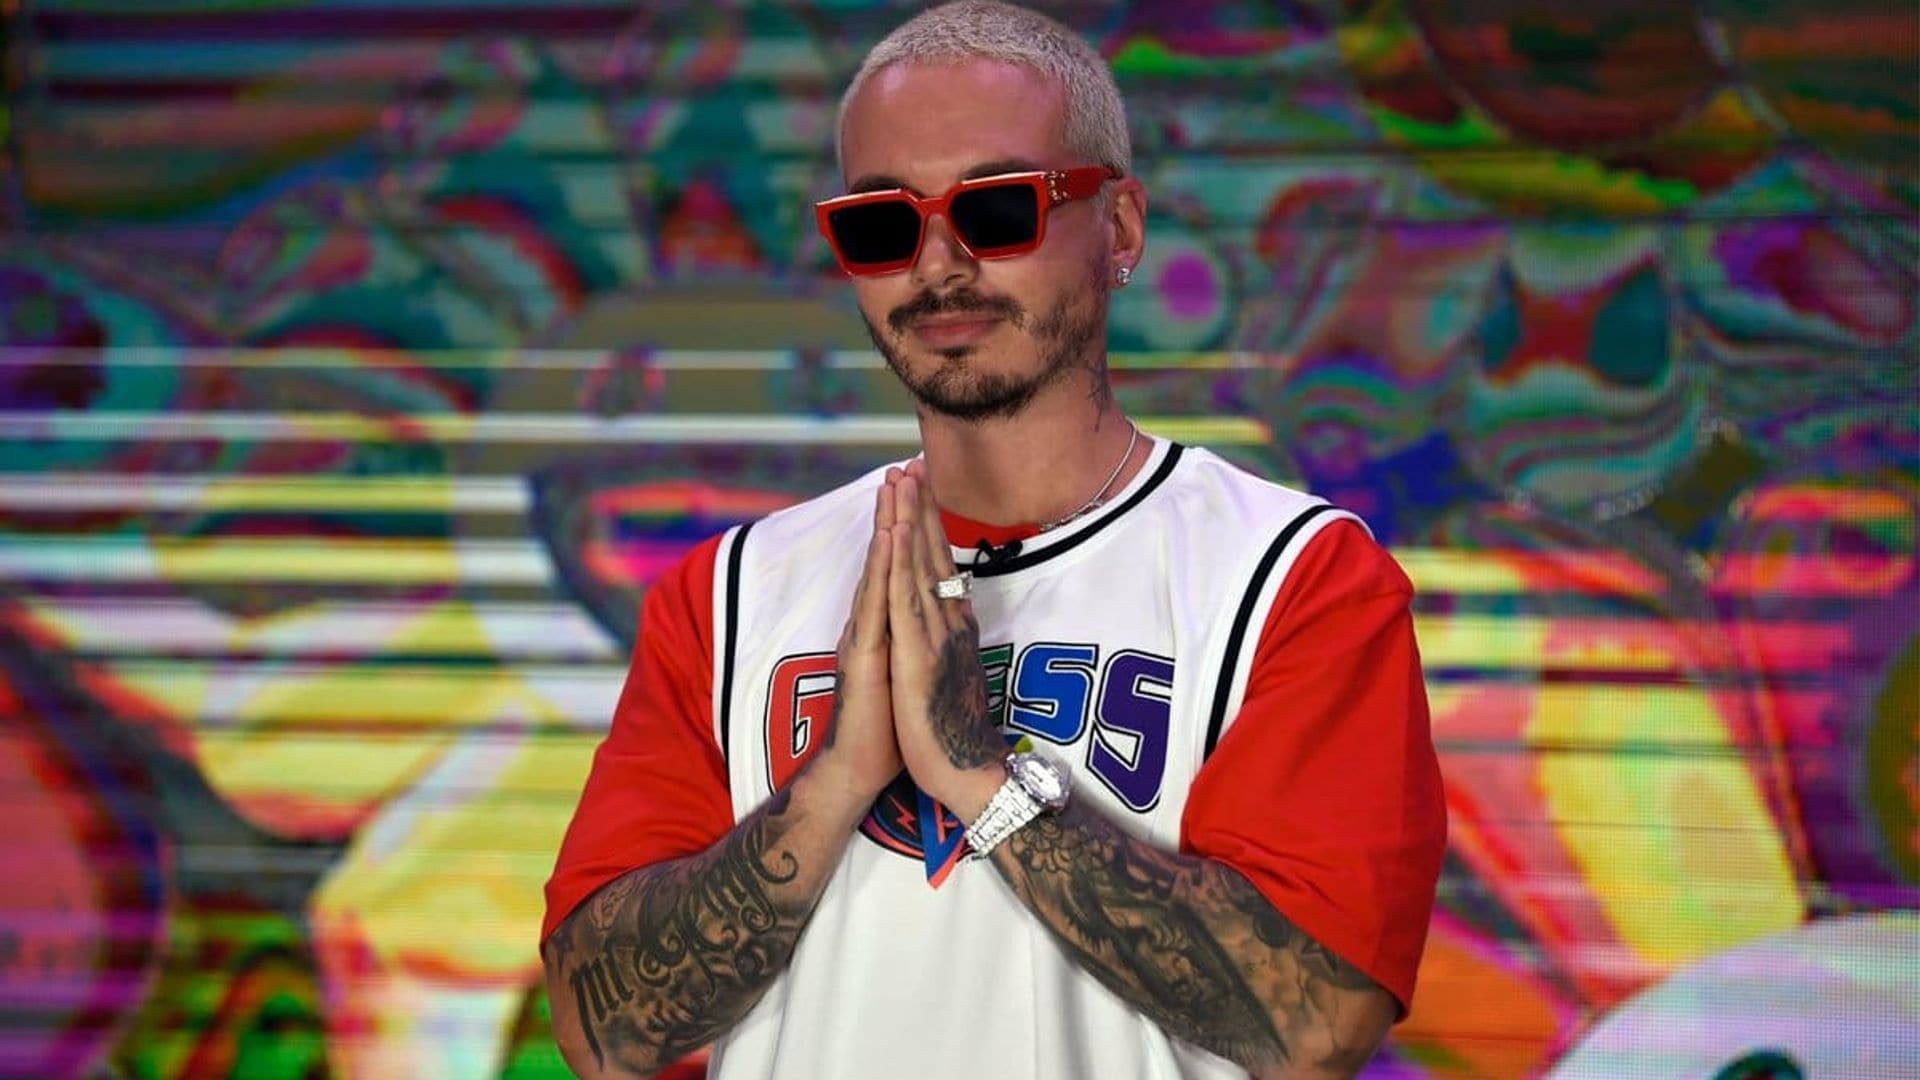 New Music Friday: the biggest releases from J Balvin, SZA, Saweetie, and more